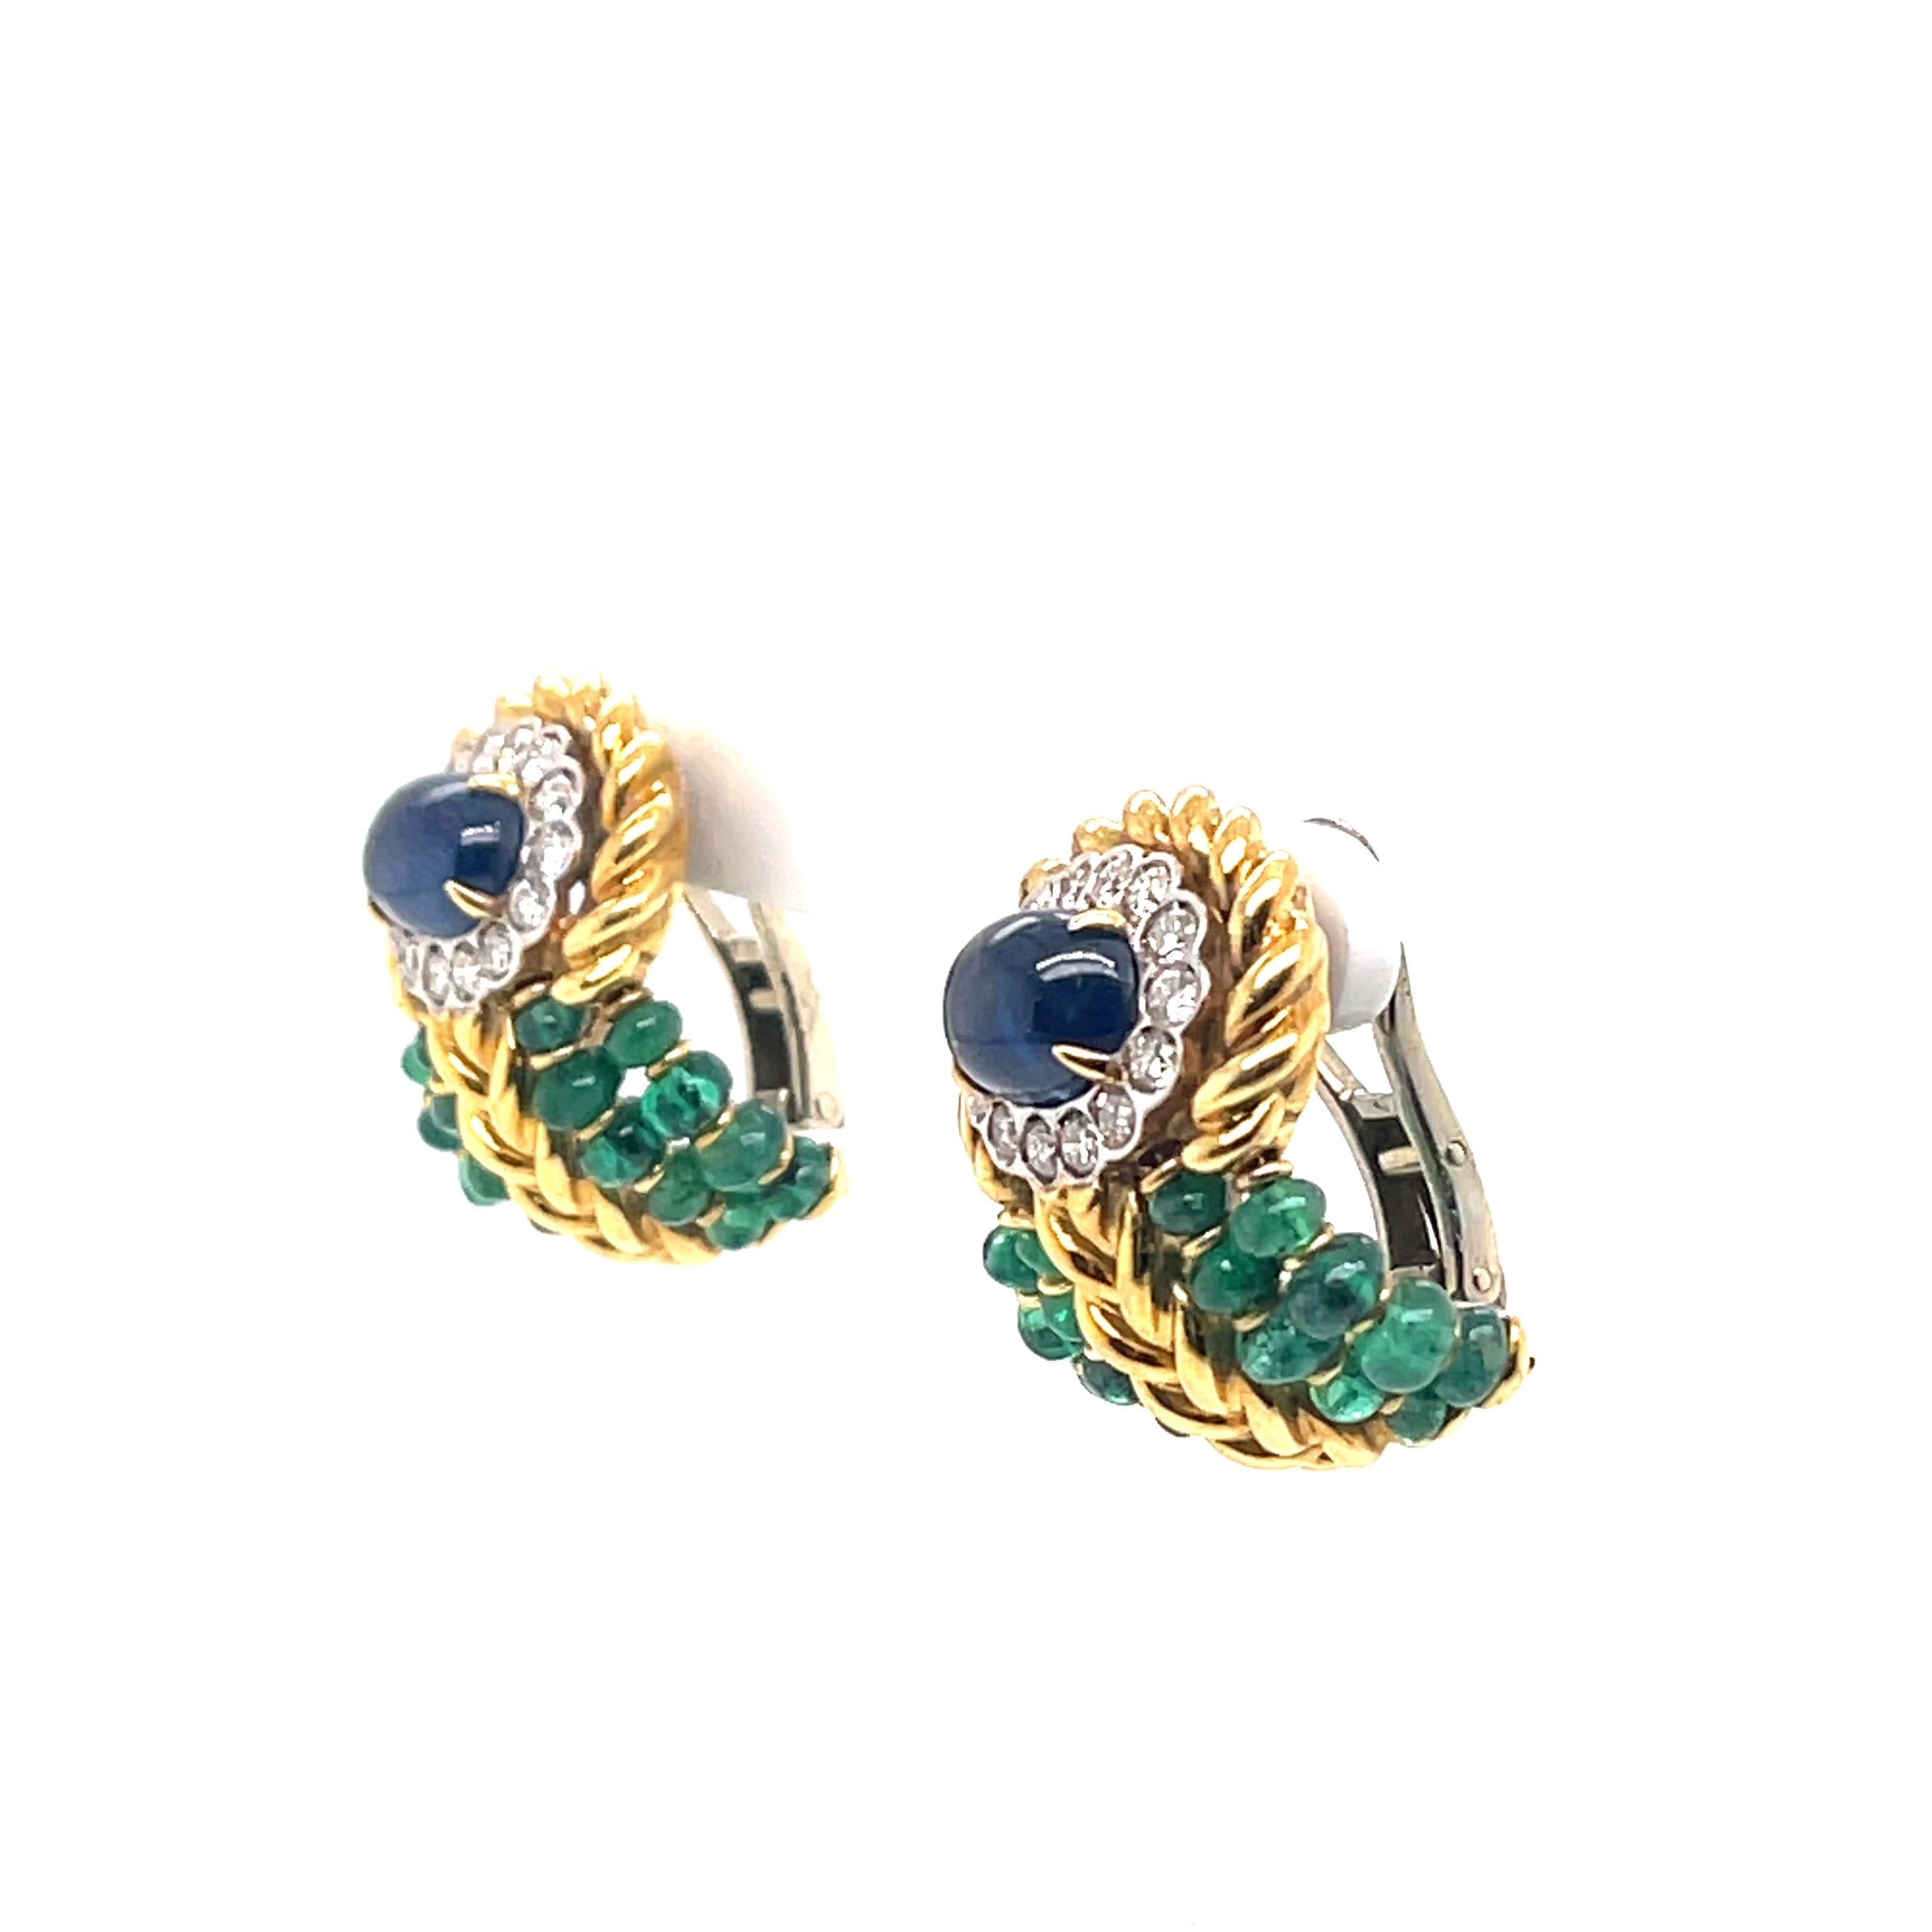 beautiful earrings featuring emerald beads and a beautiful sapphire 